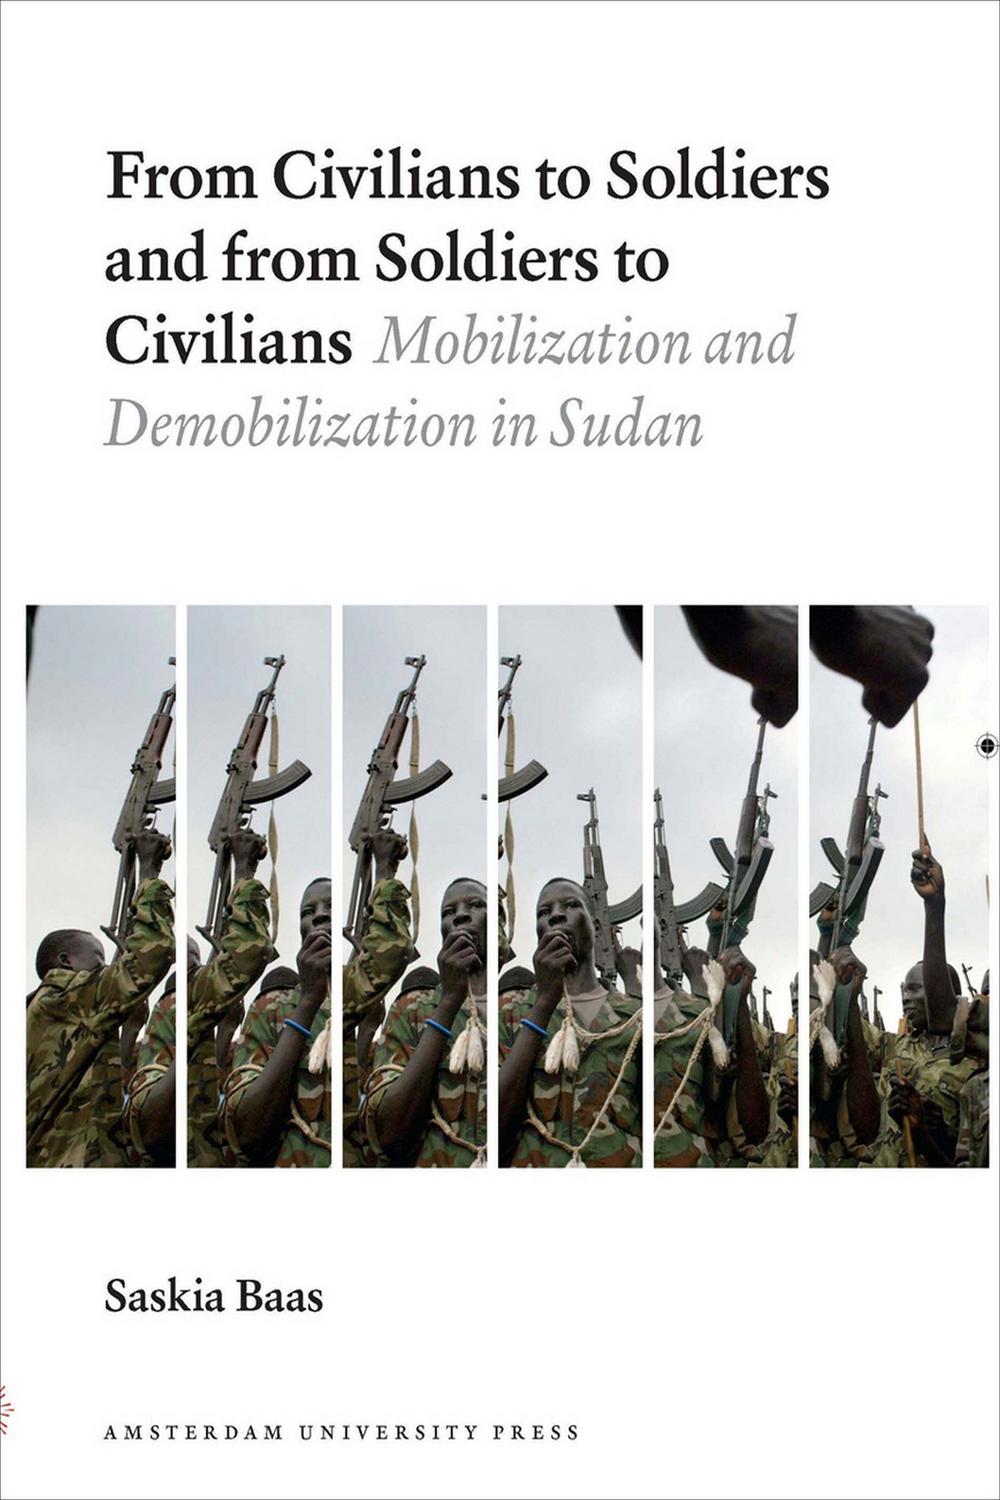 From Civilians to Soldiers and from Soldiers to Civilians - Saskia Baas